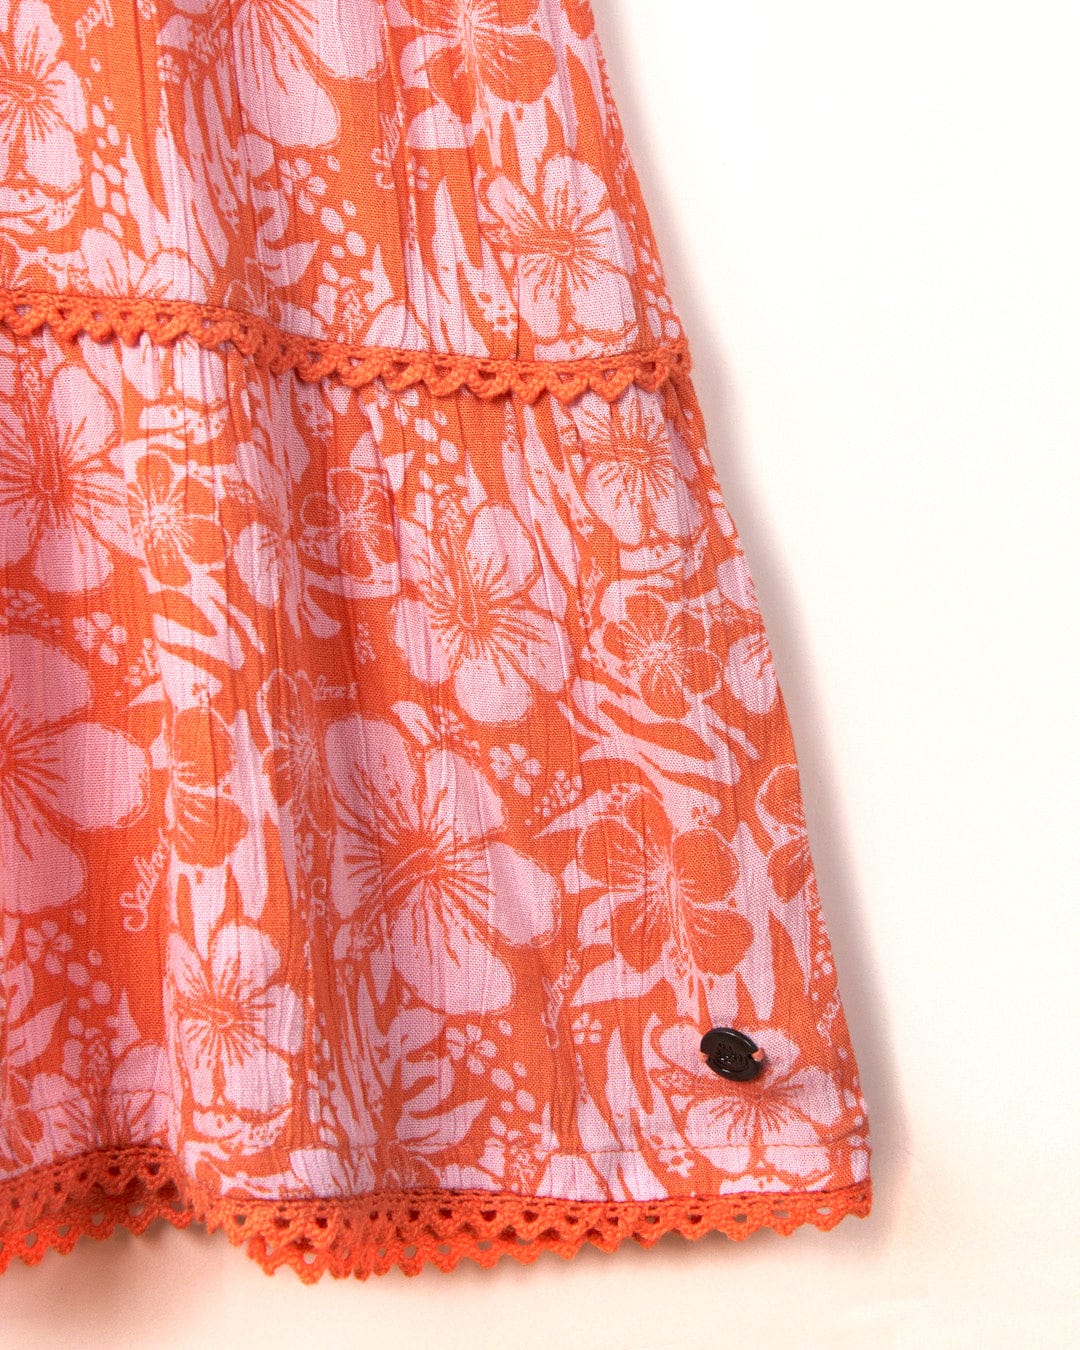 A close-up of a Marla Hibiscus dress by Saltrock with crochet lace detailing on a white background.